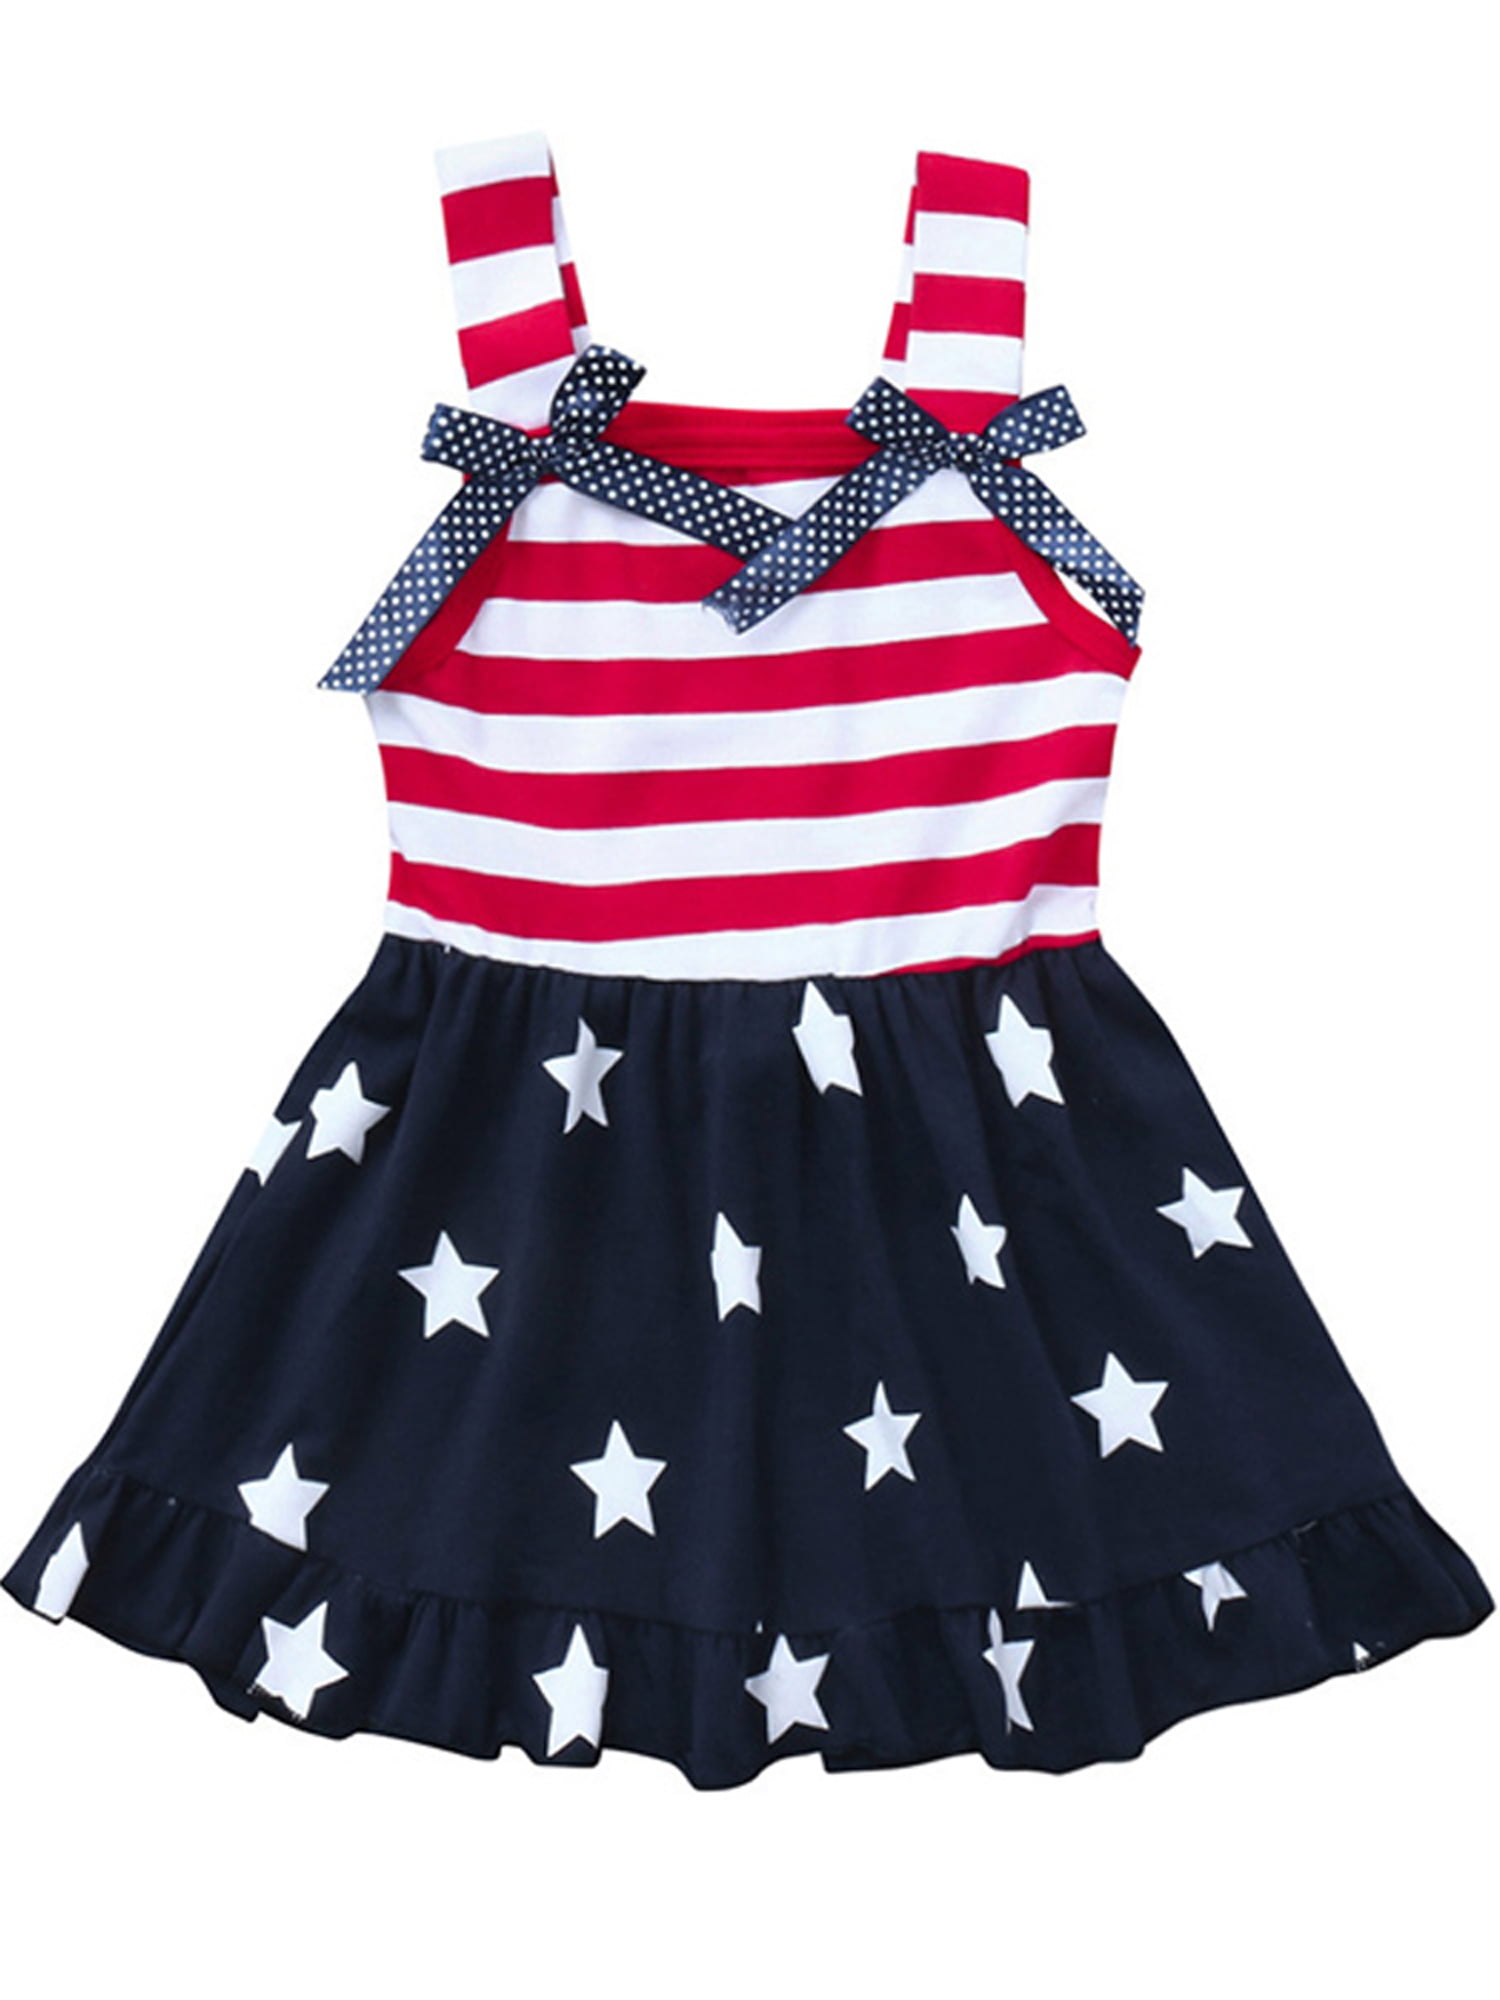 Baby Girl Clothes Striped Bowknot Summer Sundress Cotton Pocket Outfits 2-6T